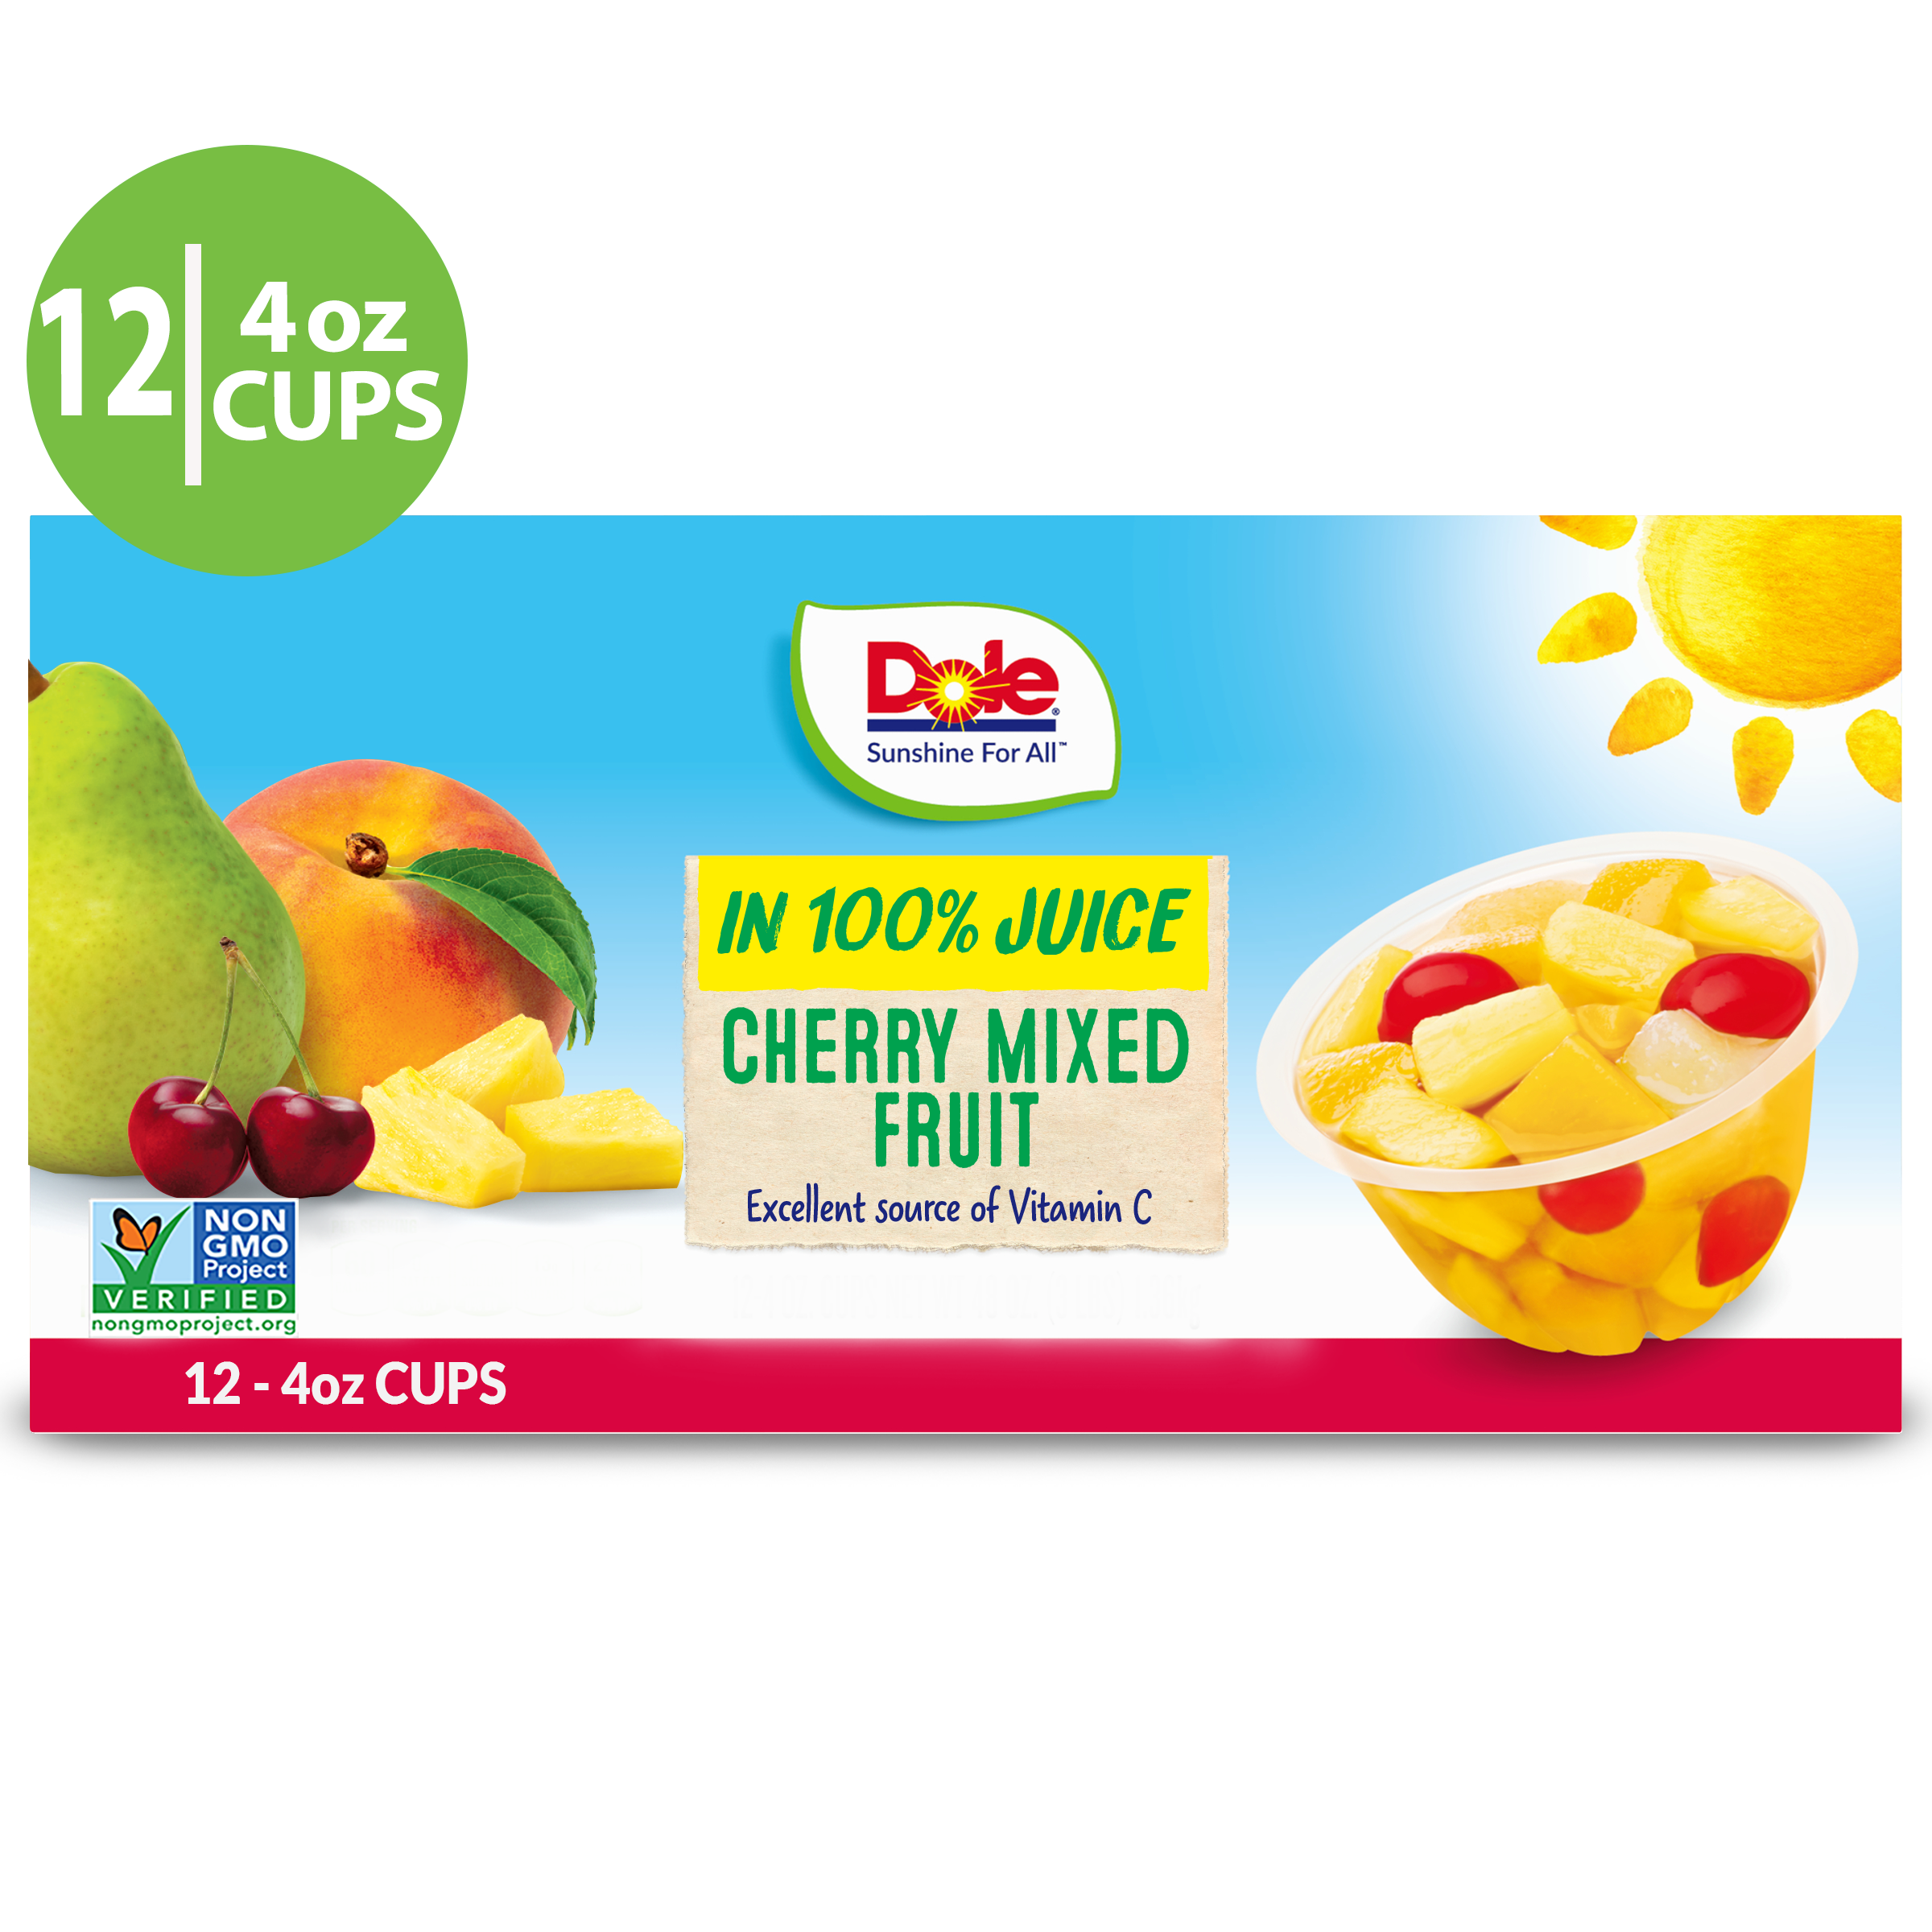 Dole Fruit Bowls Cherry Mixed Fruit in 100% Fruit Juice, 4 oz (12 Cups) - image 1 of 10